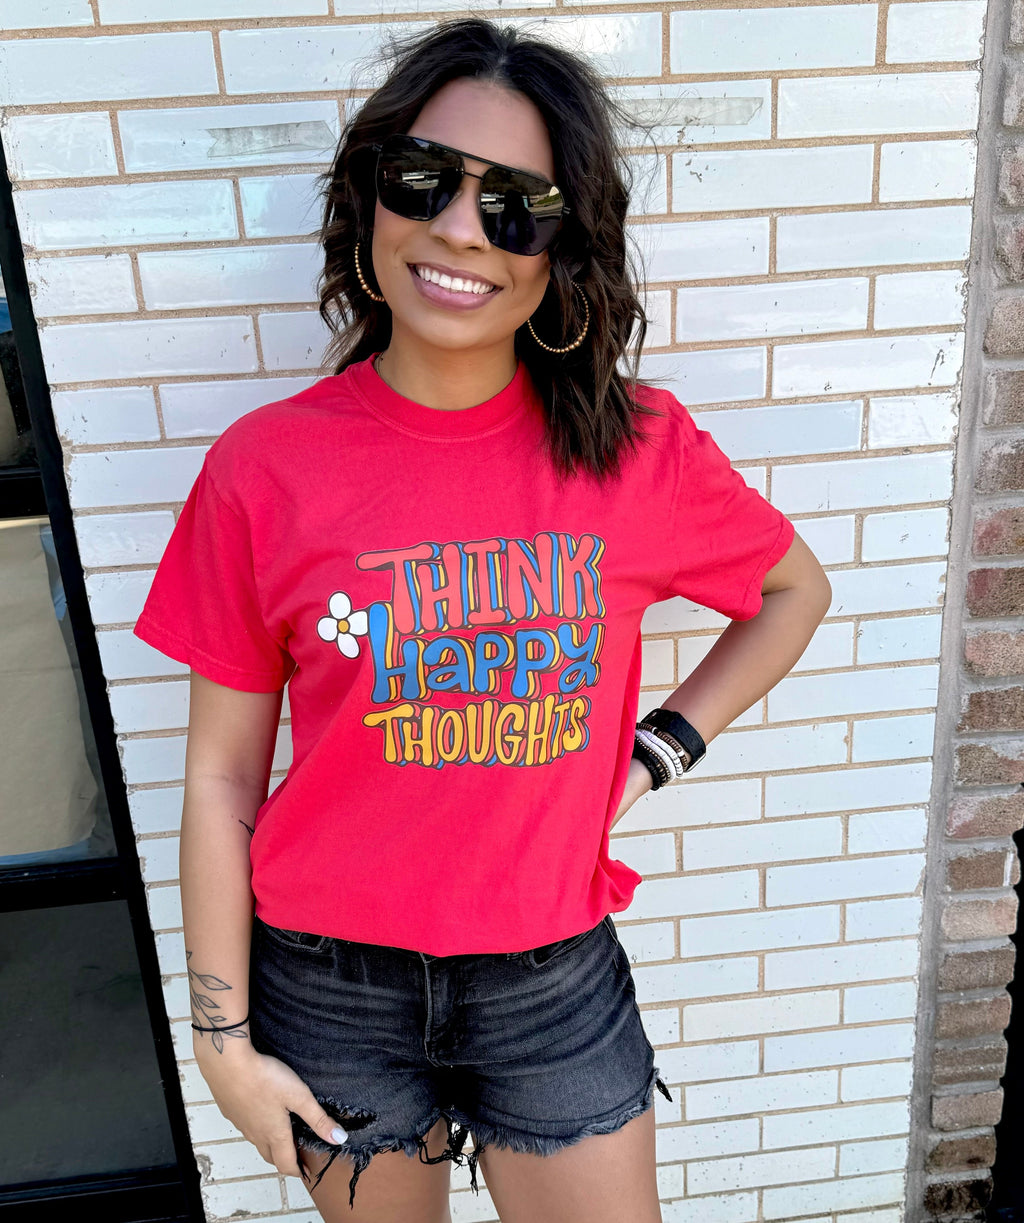 Happy Thoughts tee